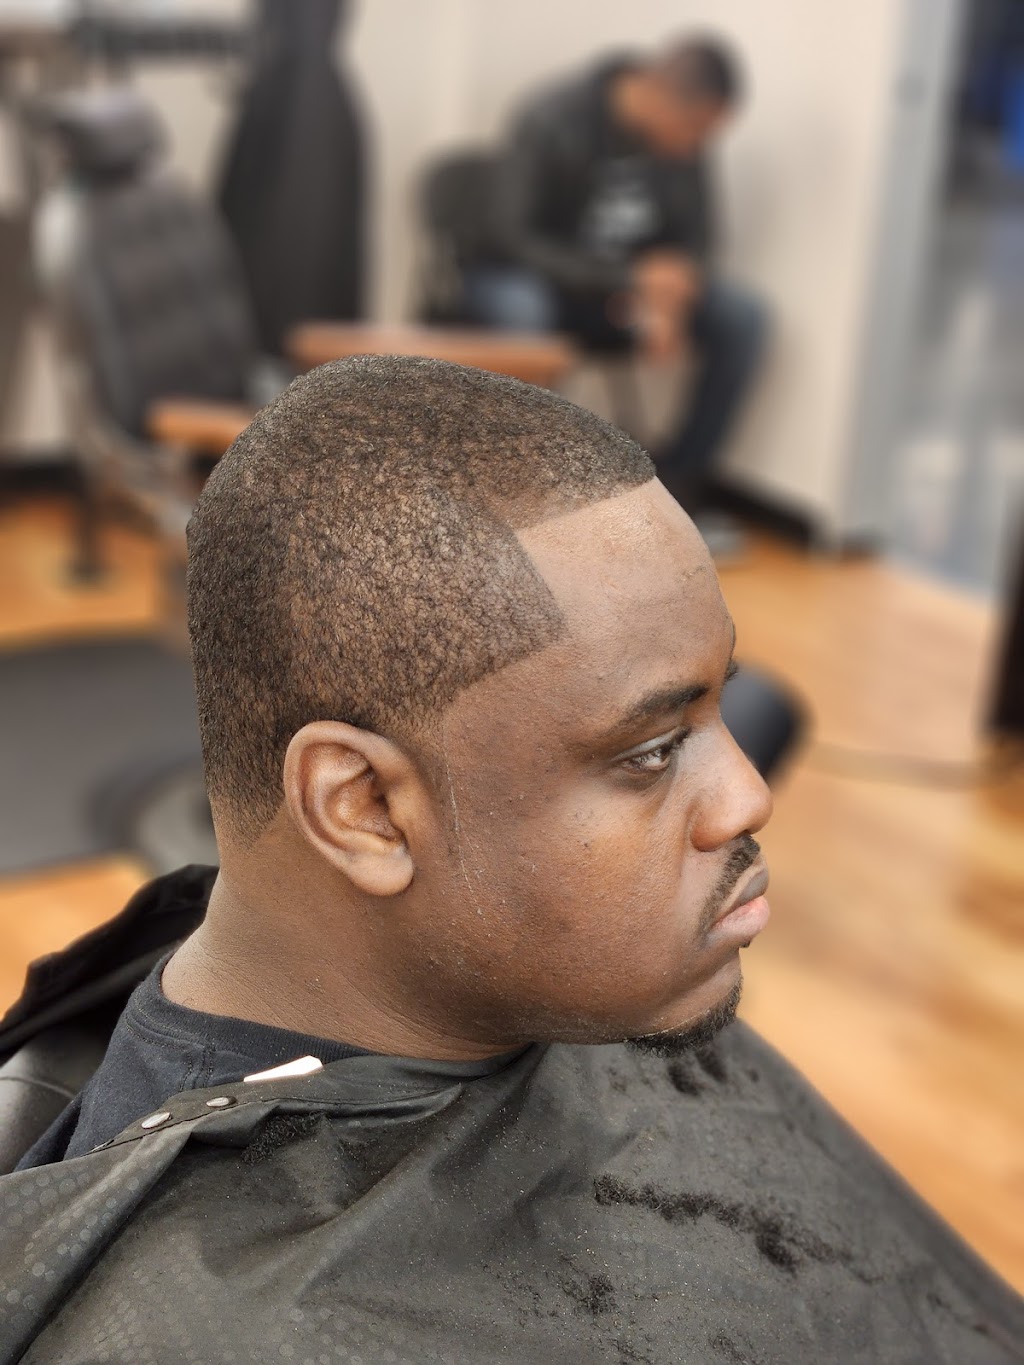 Shug Sharps Timeless Touch | 6004 W North Ave, Chicago, IL 60639 | Phone: (708) 973-7559